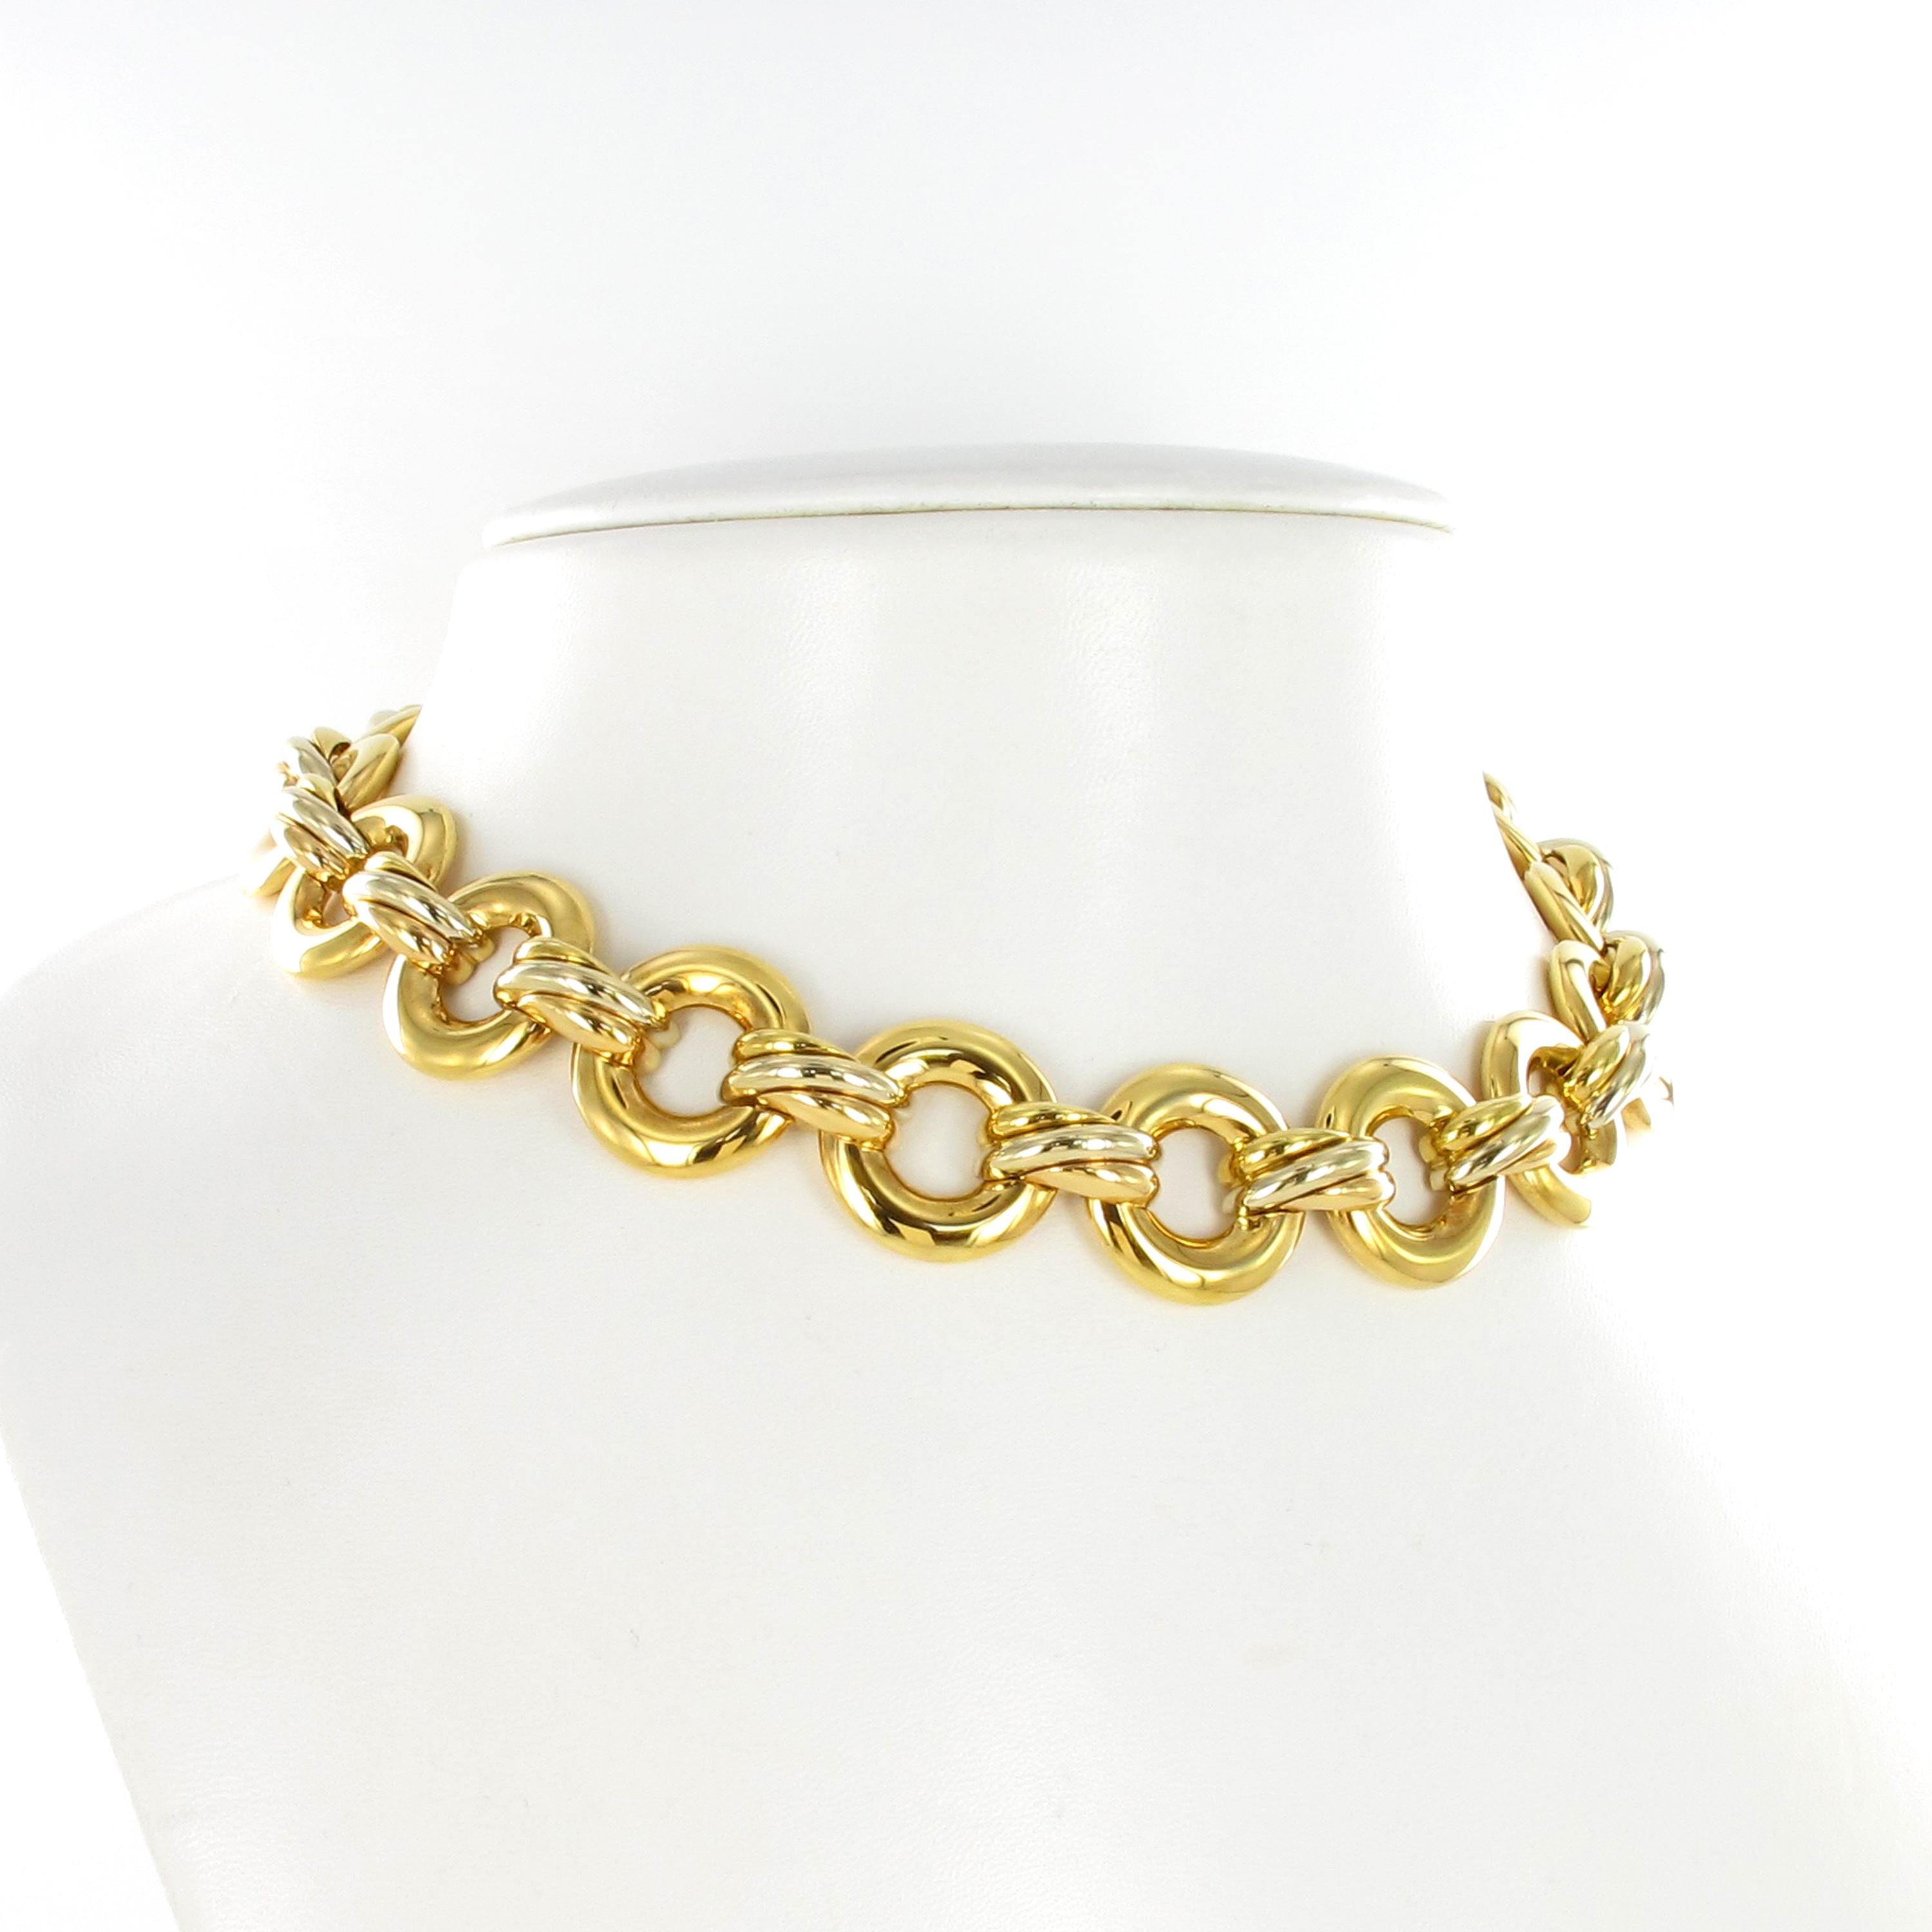 18 round links in yellow gold conected together by iconic Cartier Trinity elements in 18K yellow, rose and white gold.
This Retro looking necklace is comming with original box.   

inner circumference measures approximately 14 inches, 13/16 at